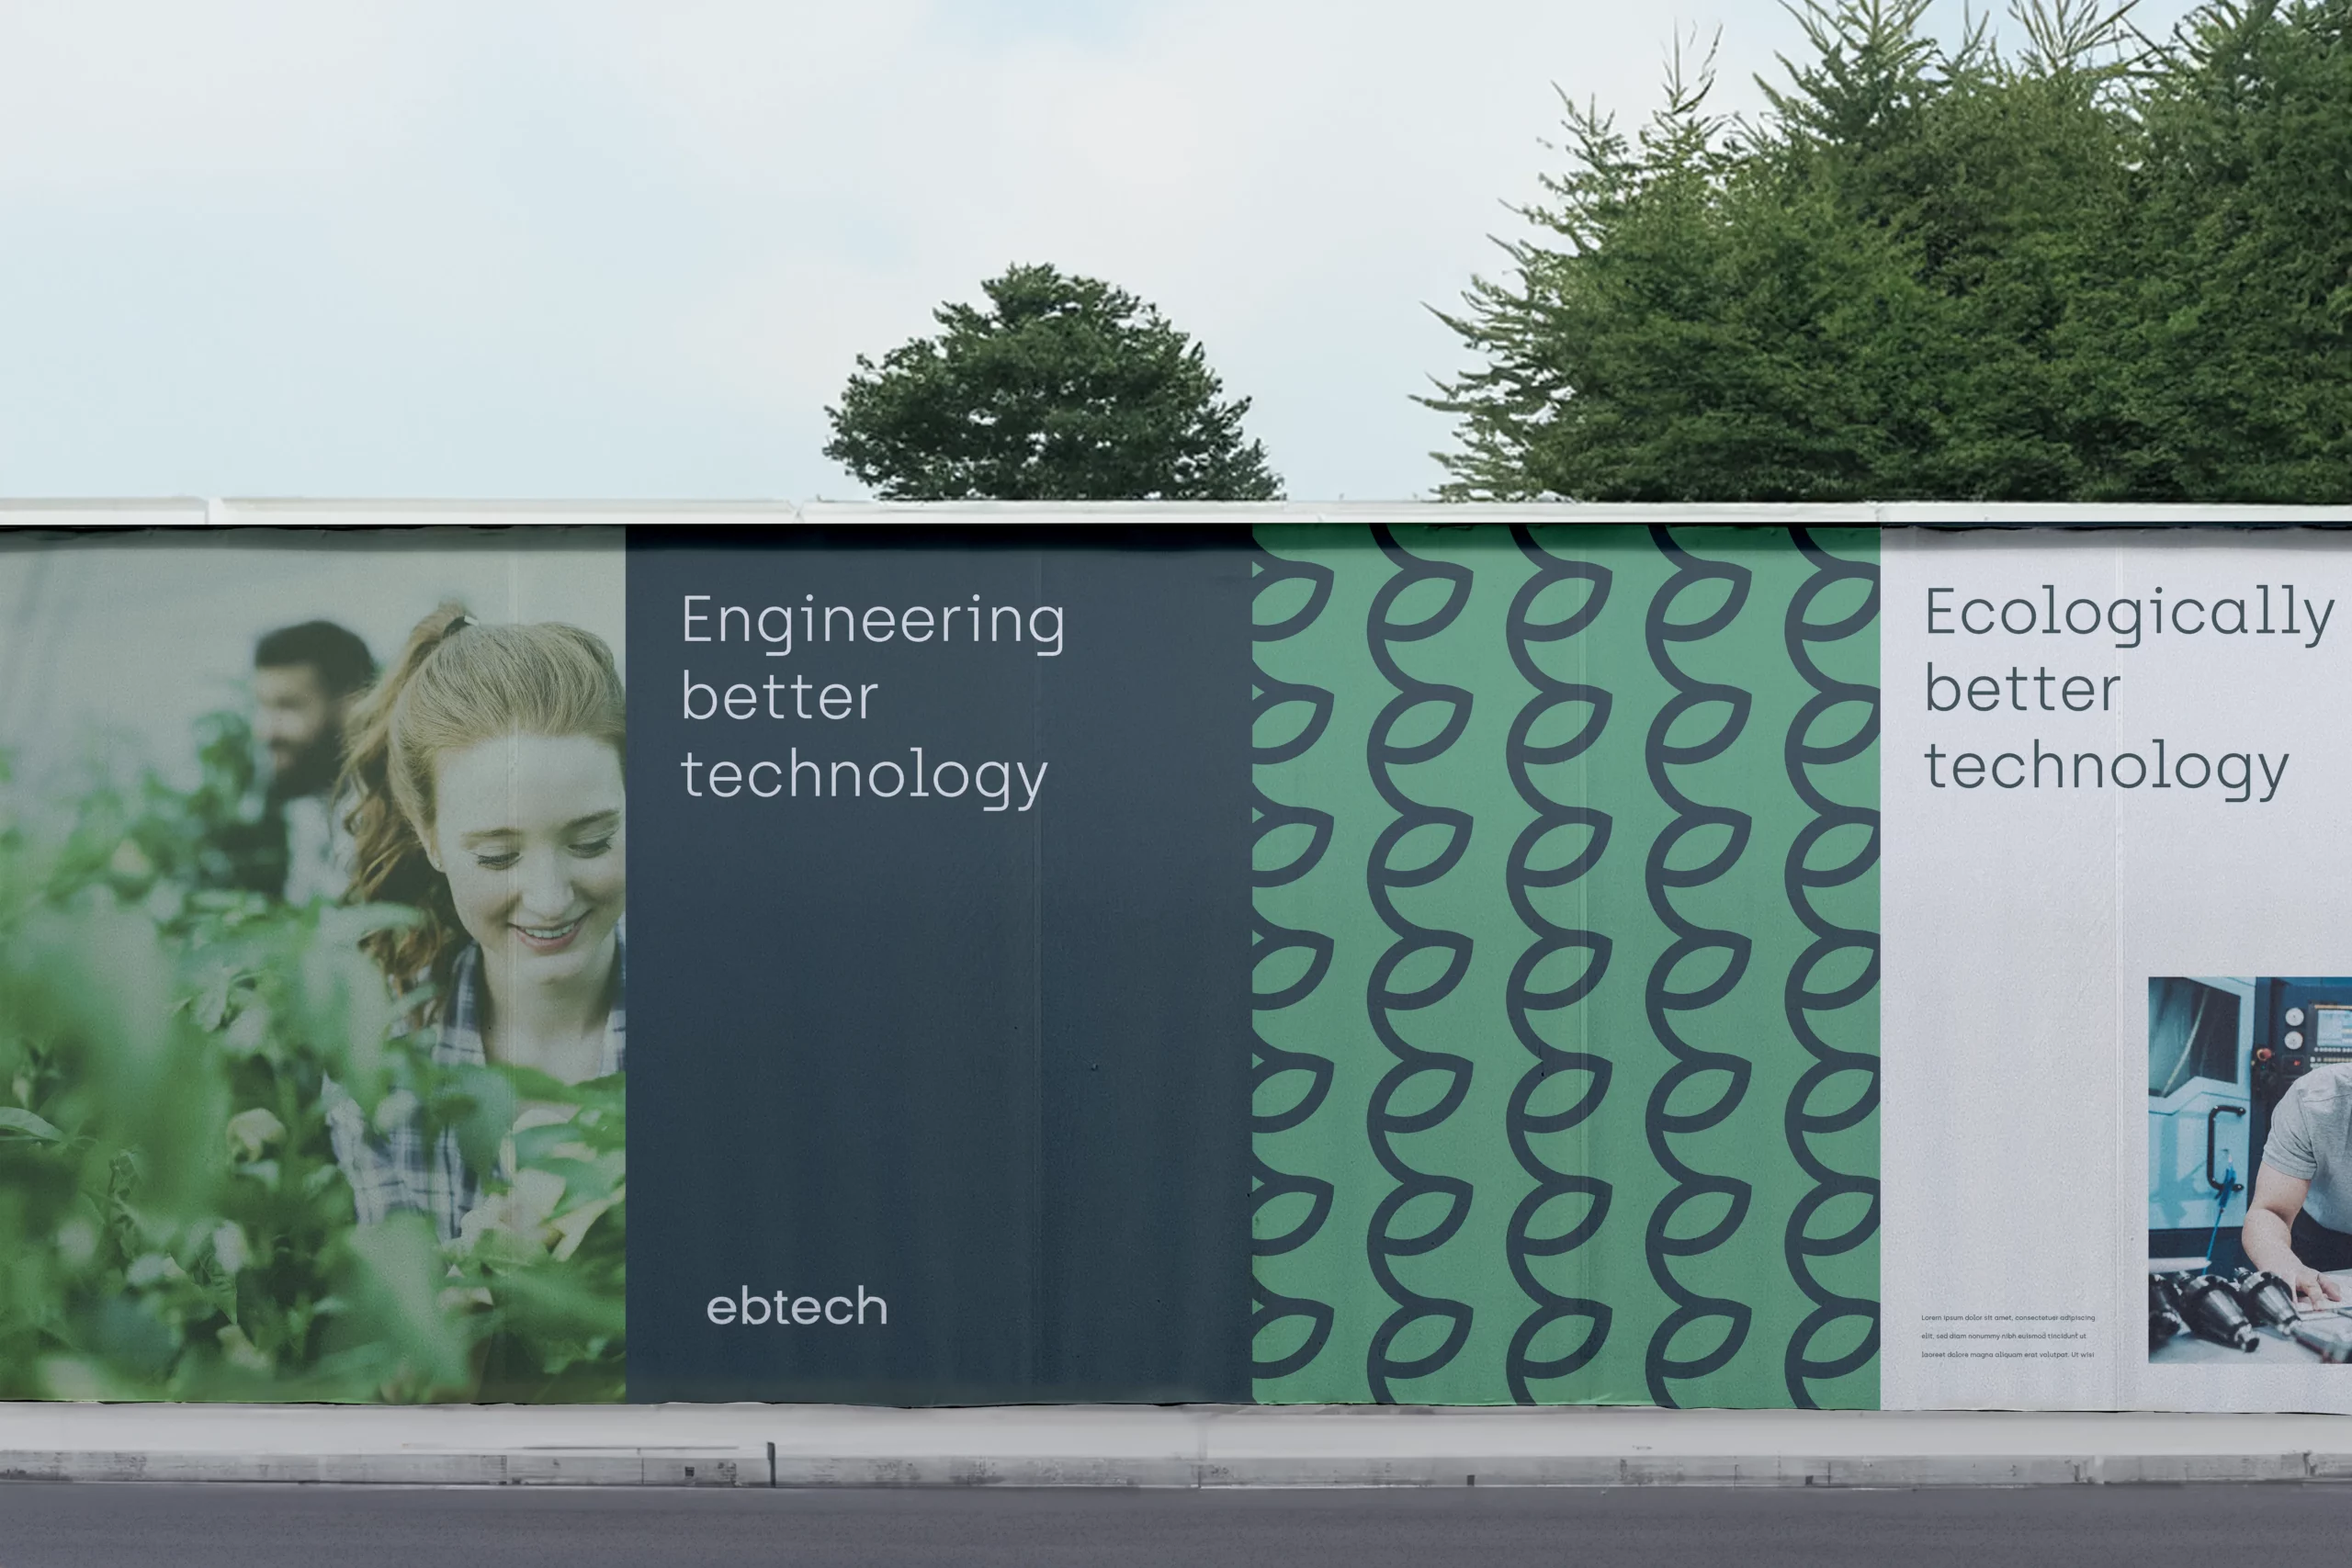 Ebtech Wall Poster Designs. Construction branded boards. Branded Materials by Ten Fathoms